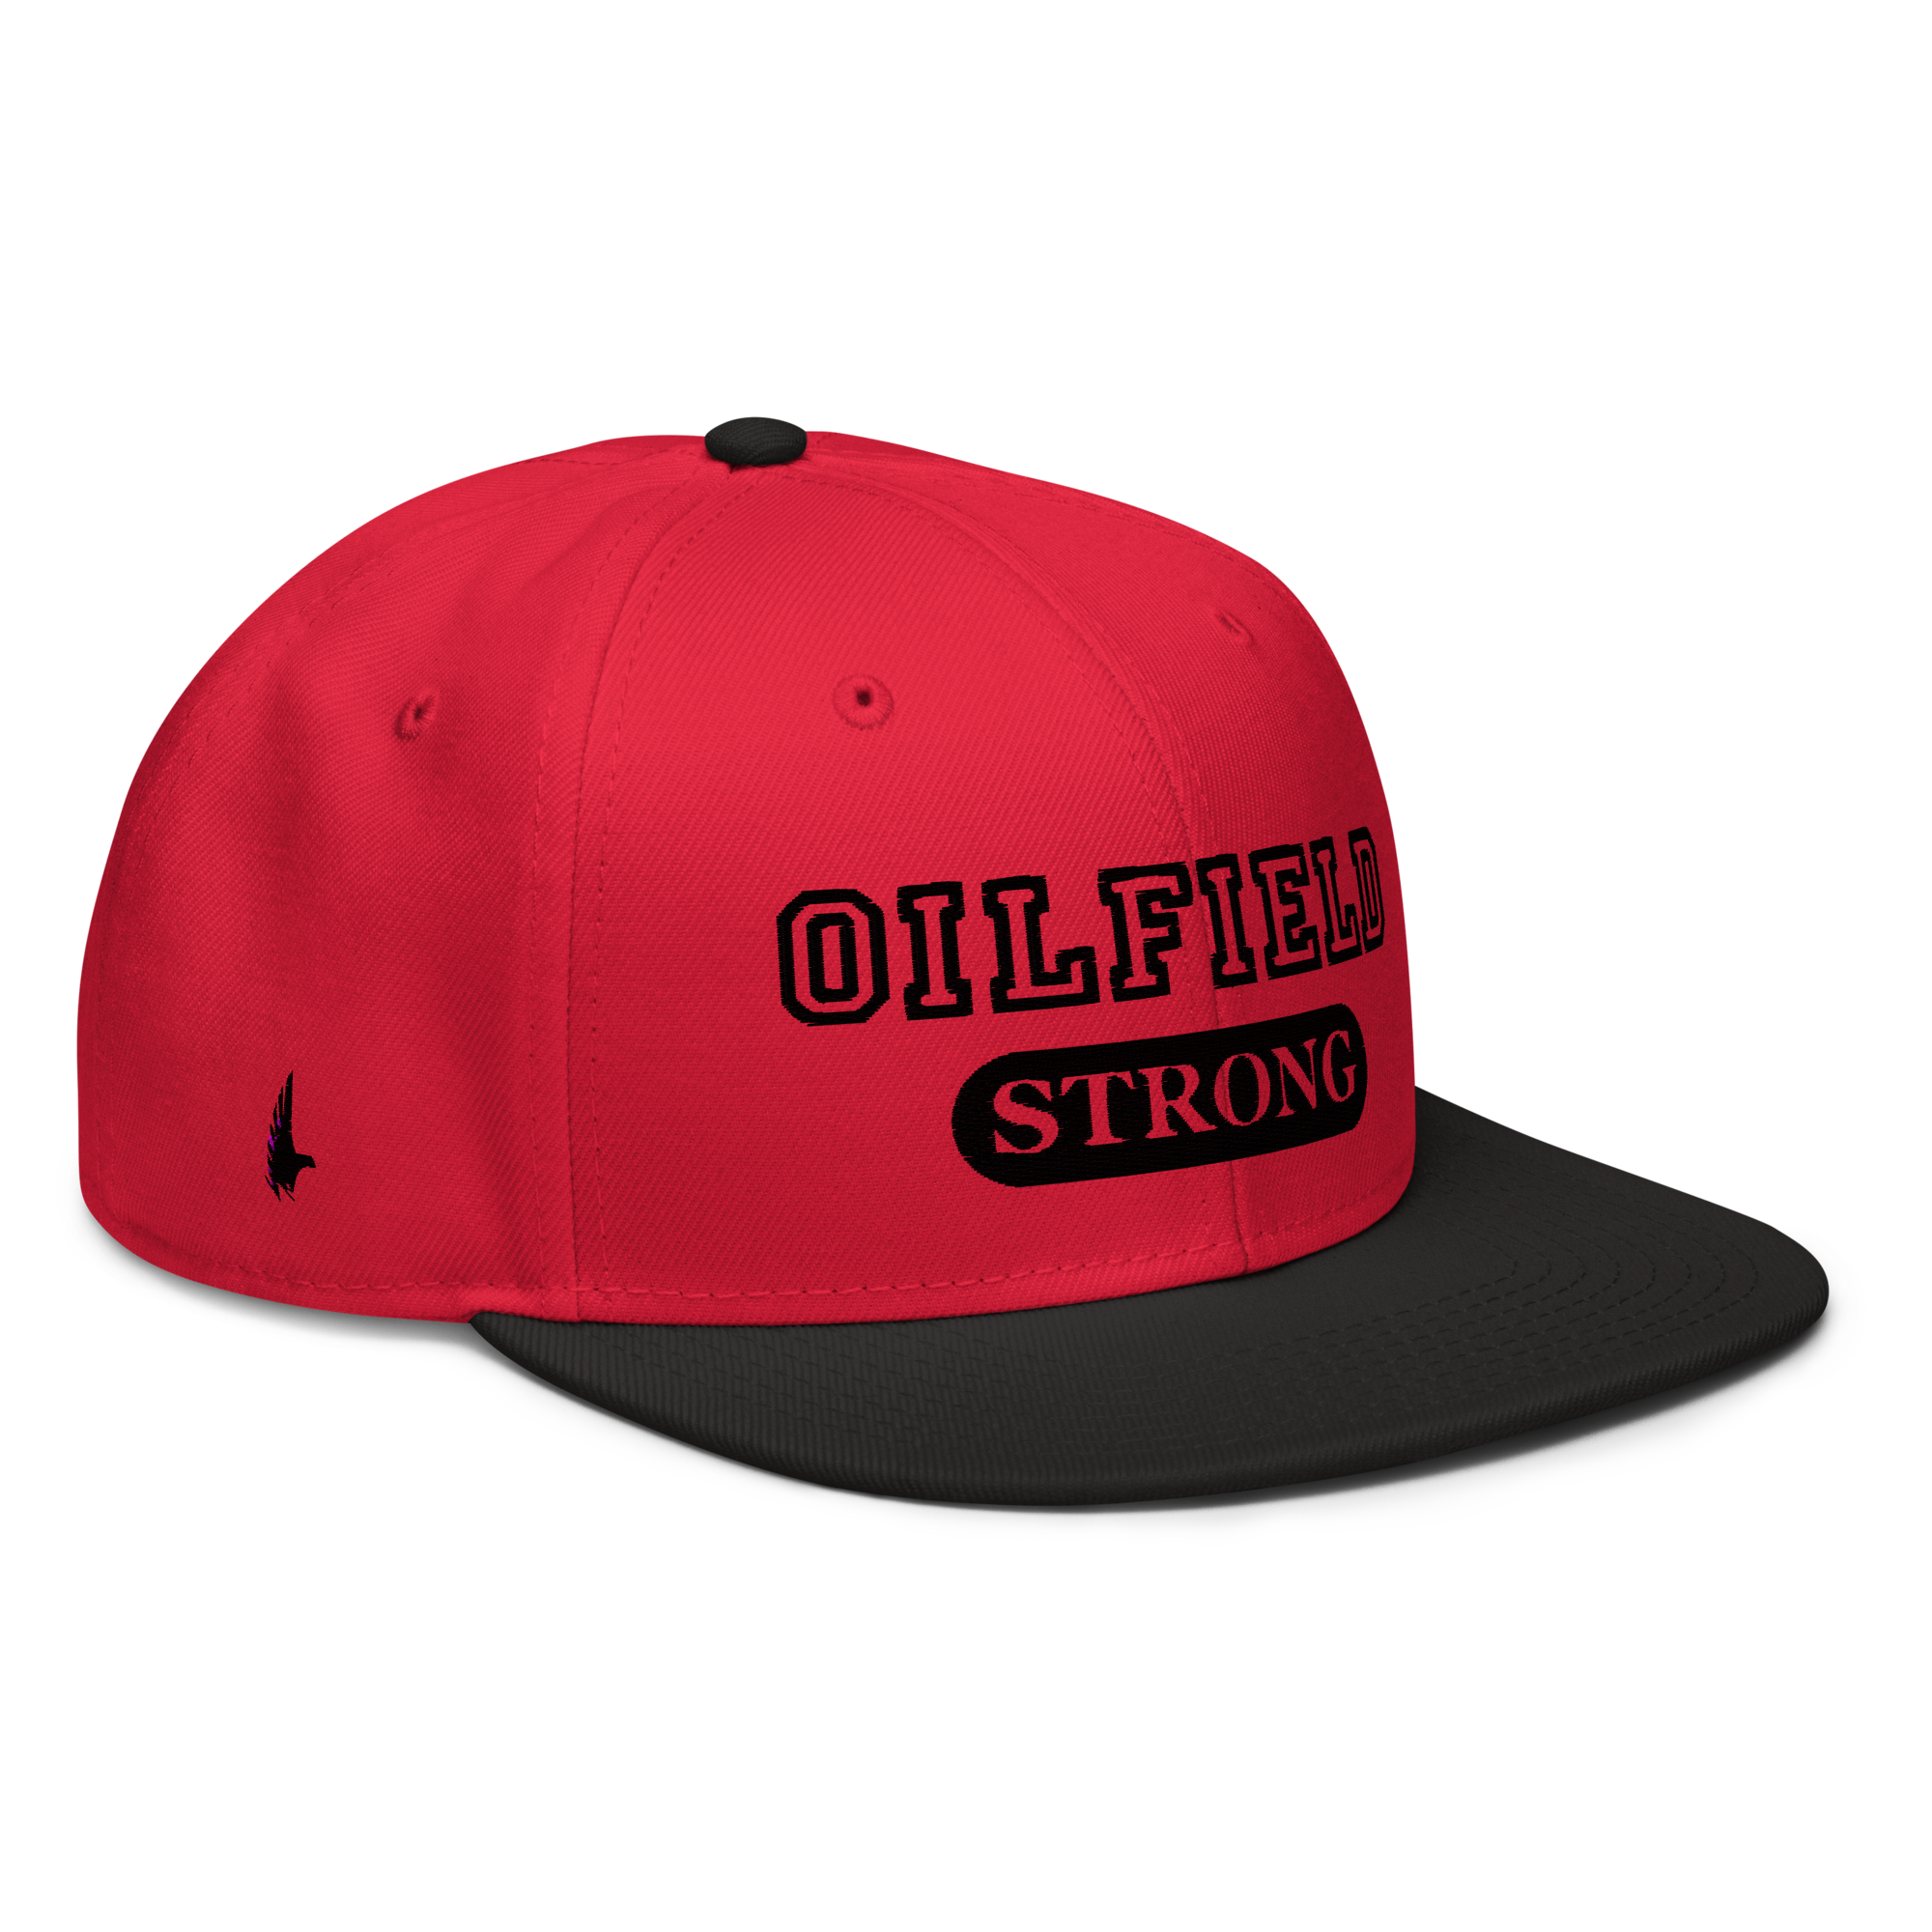 Oilfield Strong Snapback Hat - Red / Black / Black - Loyalty Vibes